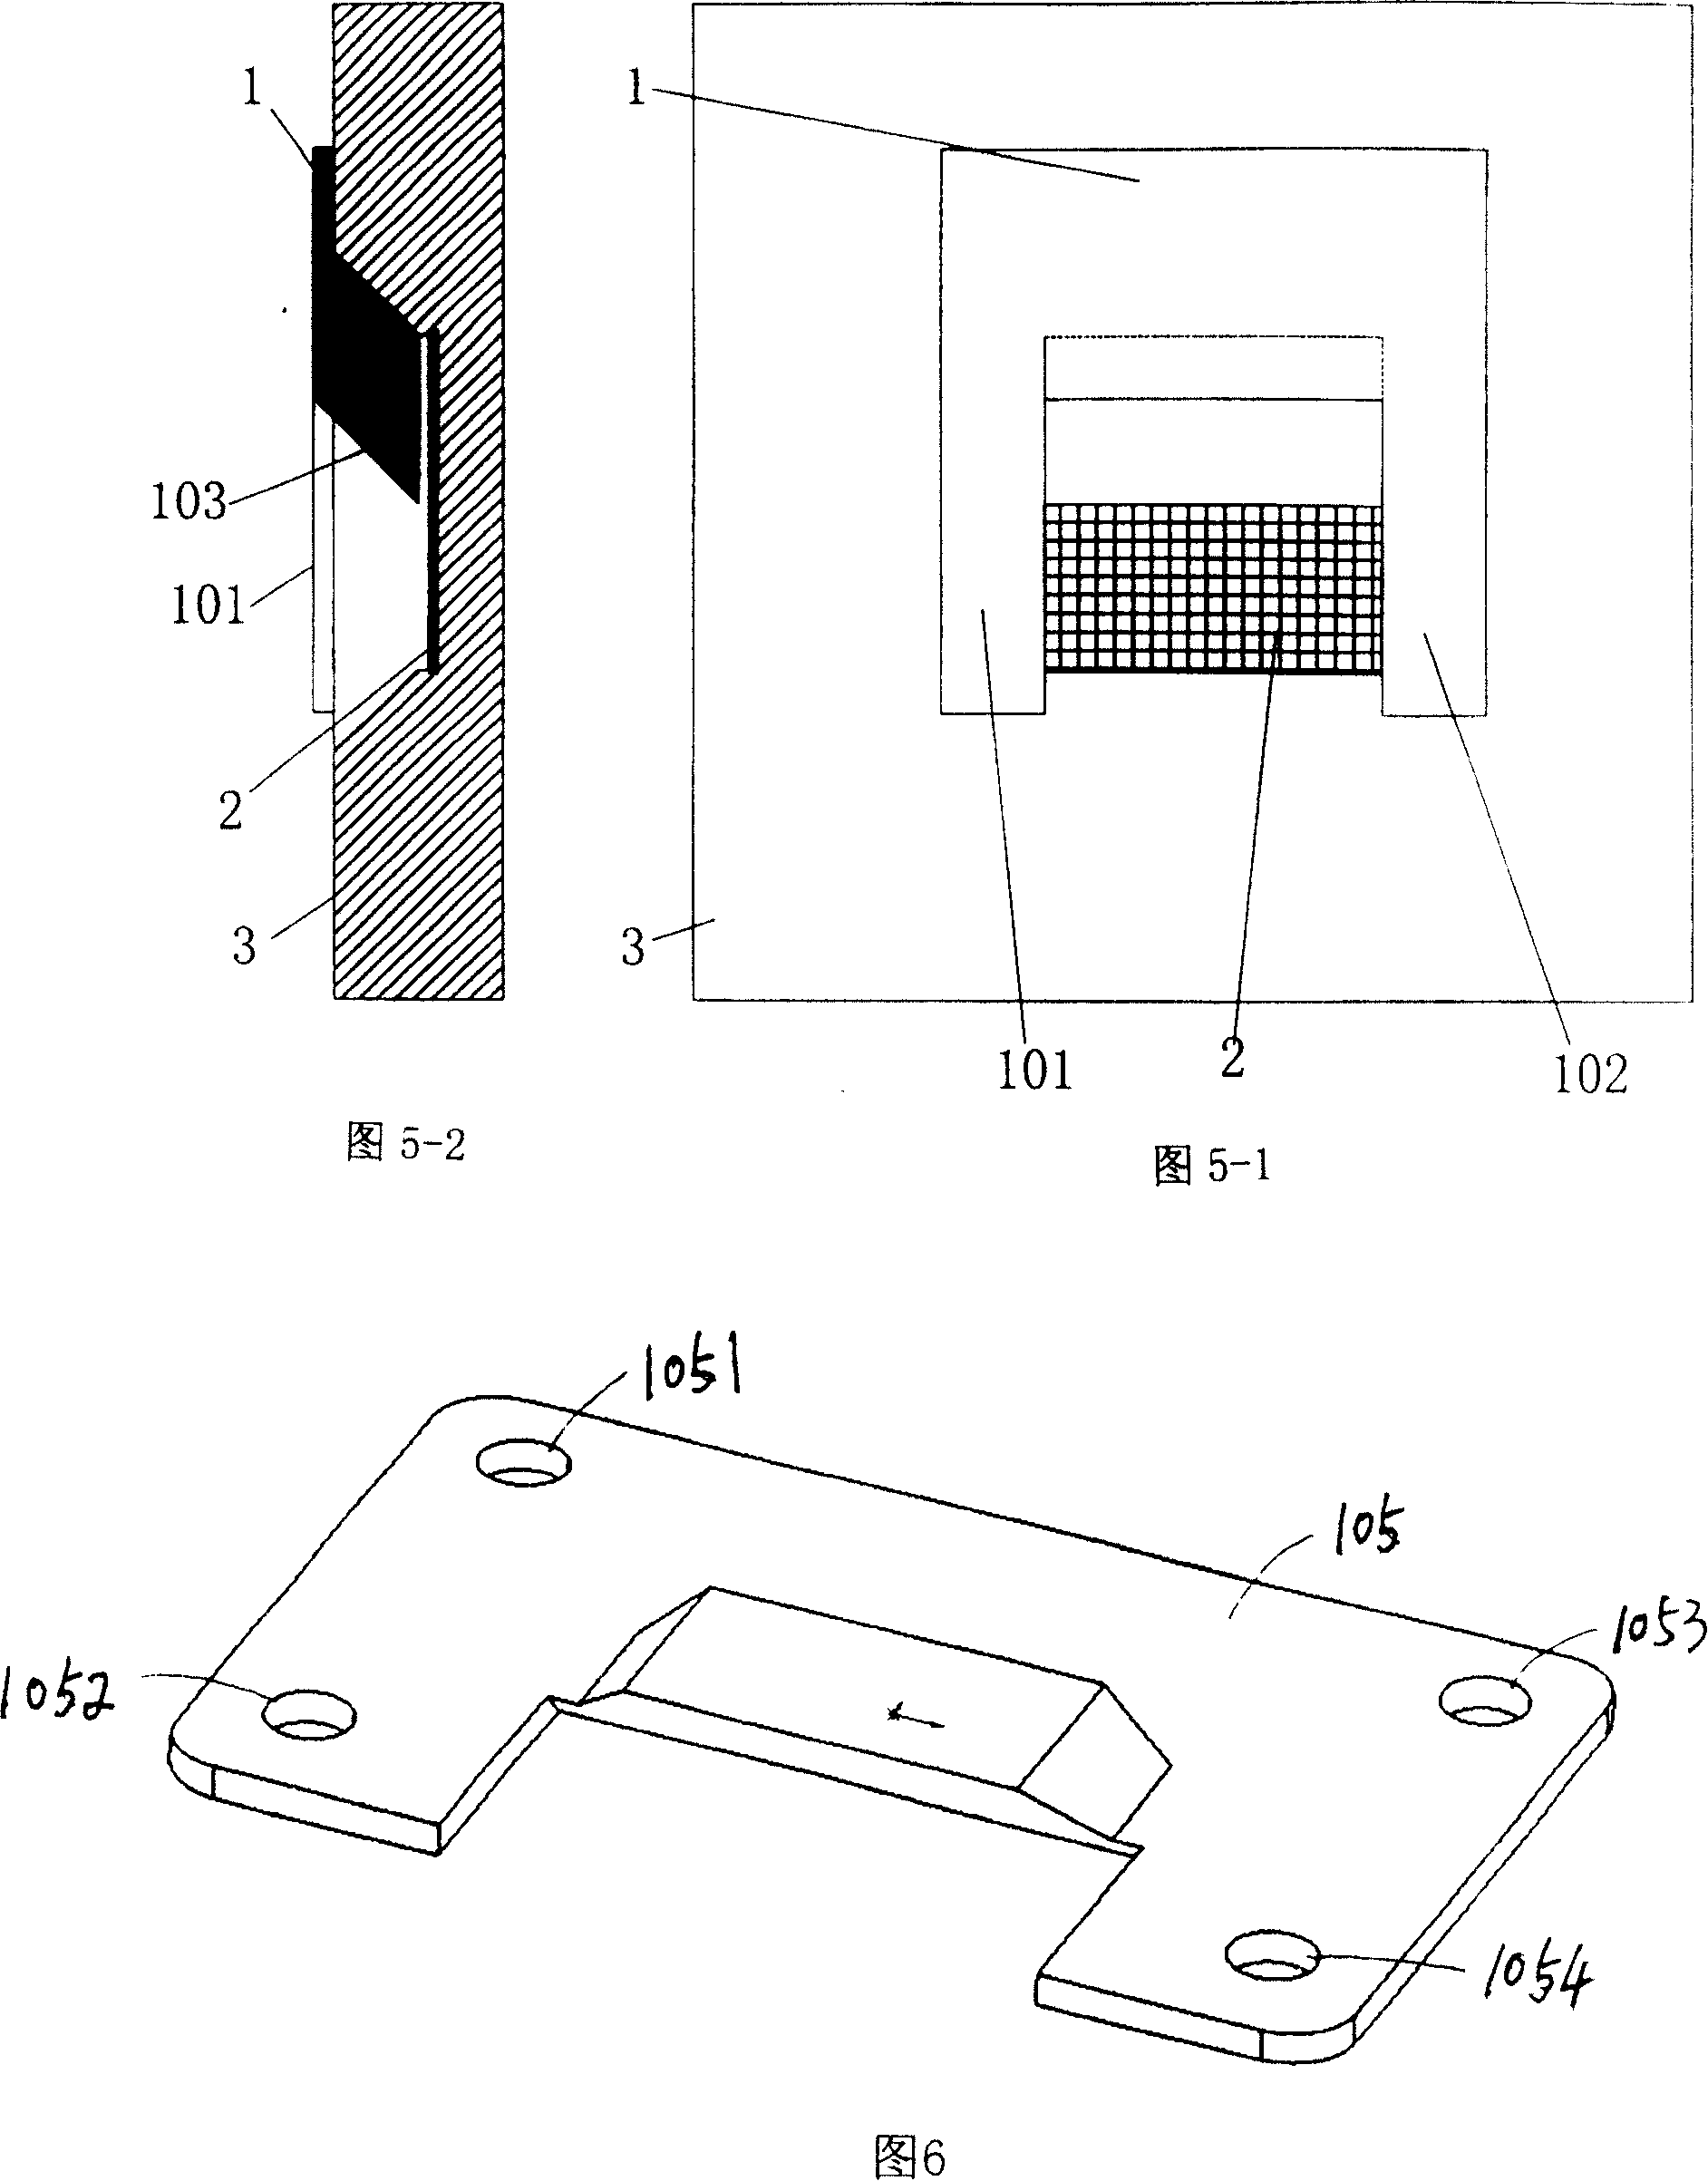 Method for improving face array frame transfer CCD working frame frequency